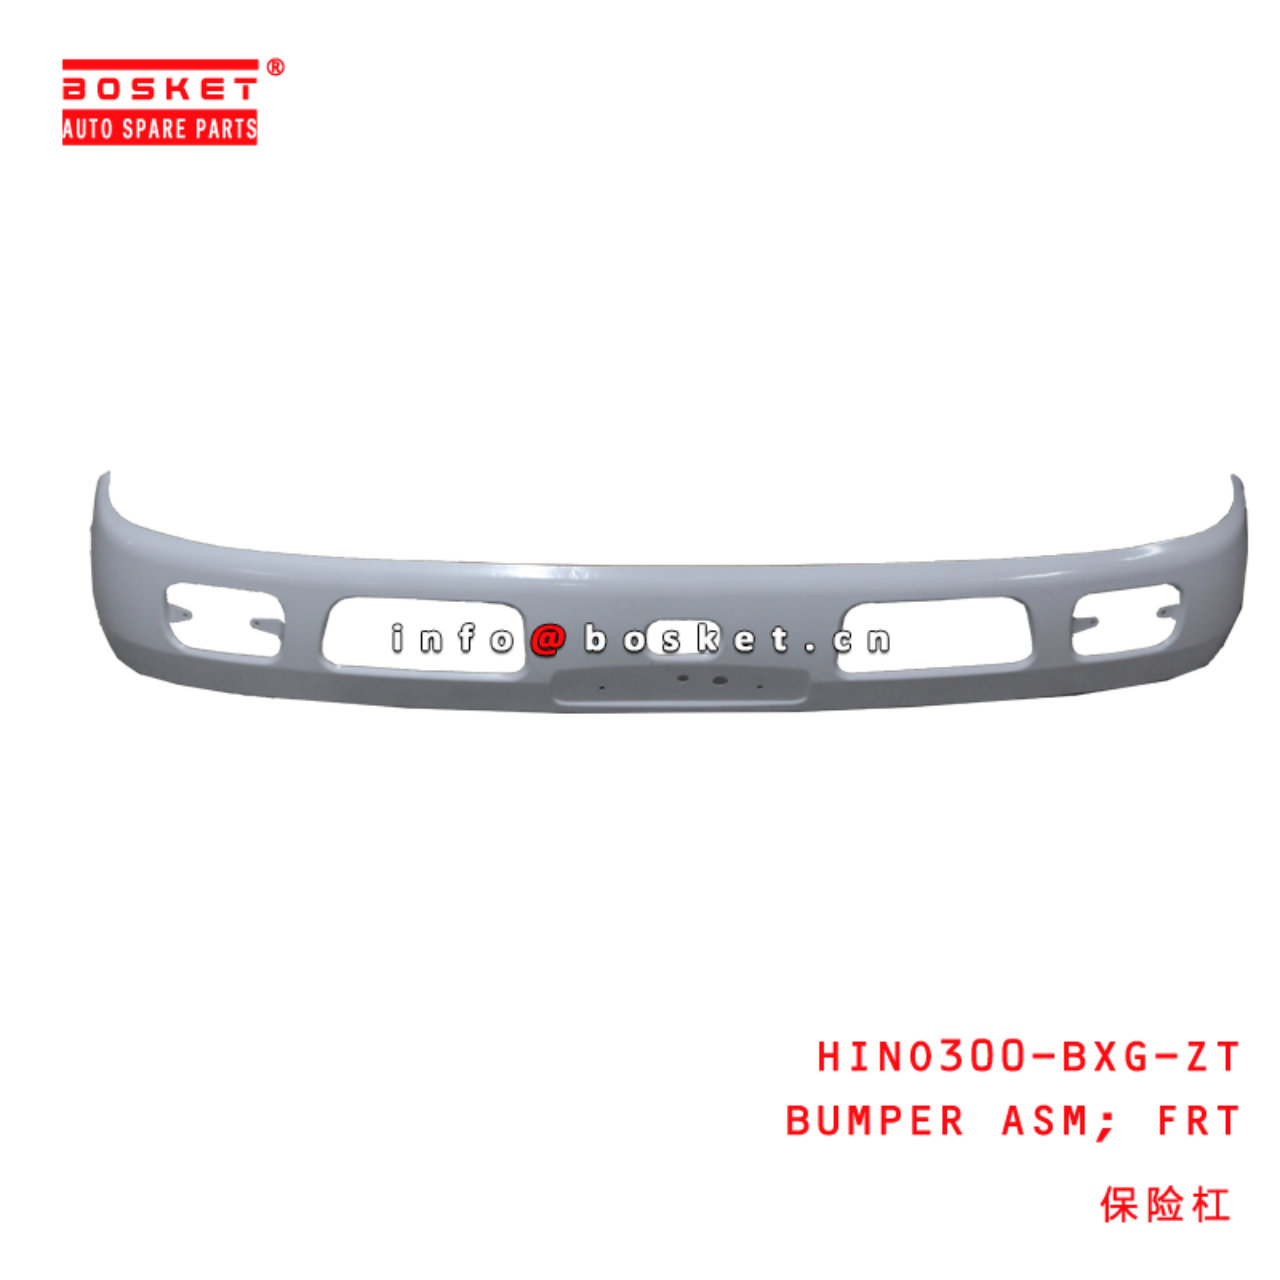 HINO300-BXG-ZT Front Bumper Assembly Suitable For HINO 300